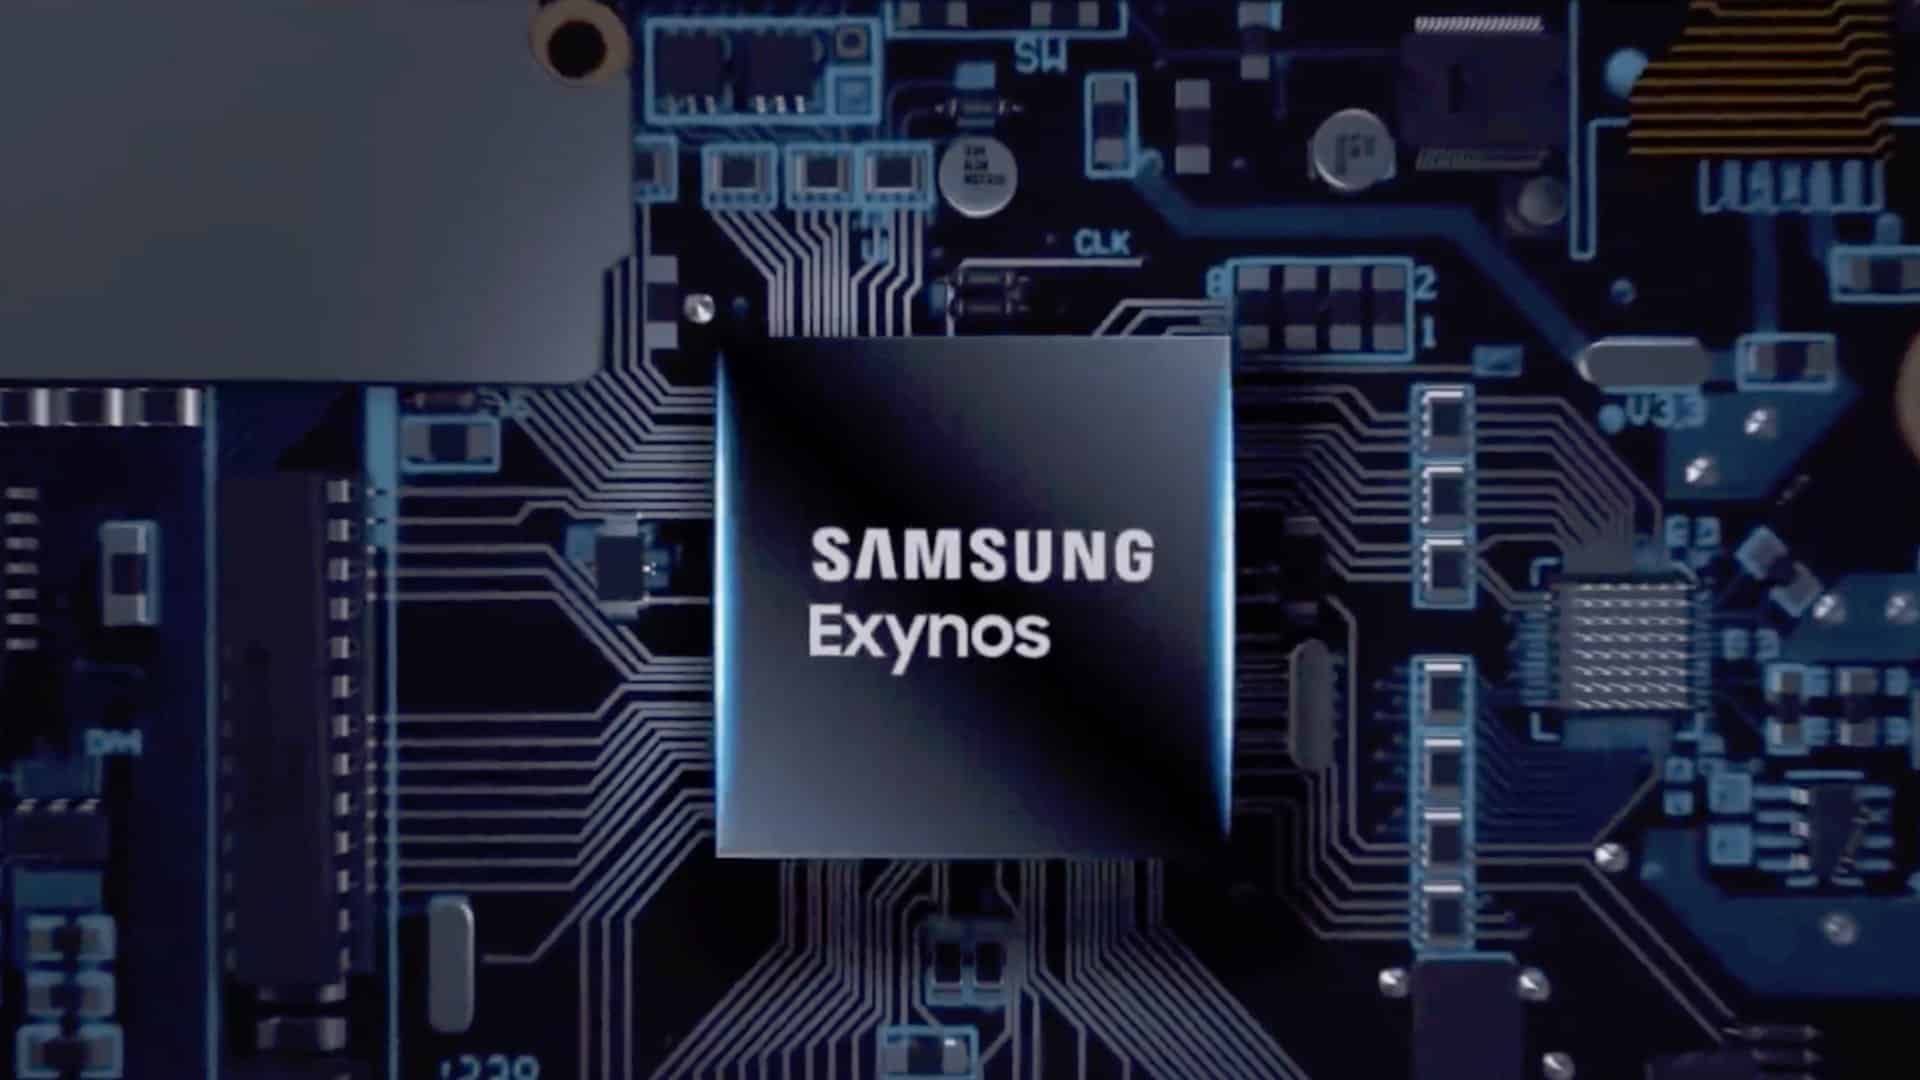 Samsung unveils the Exynos 2100 to compete with Qualcomm’s Snapdragon 888